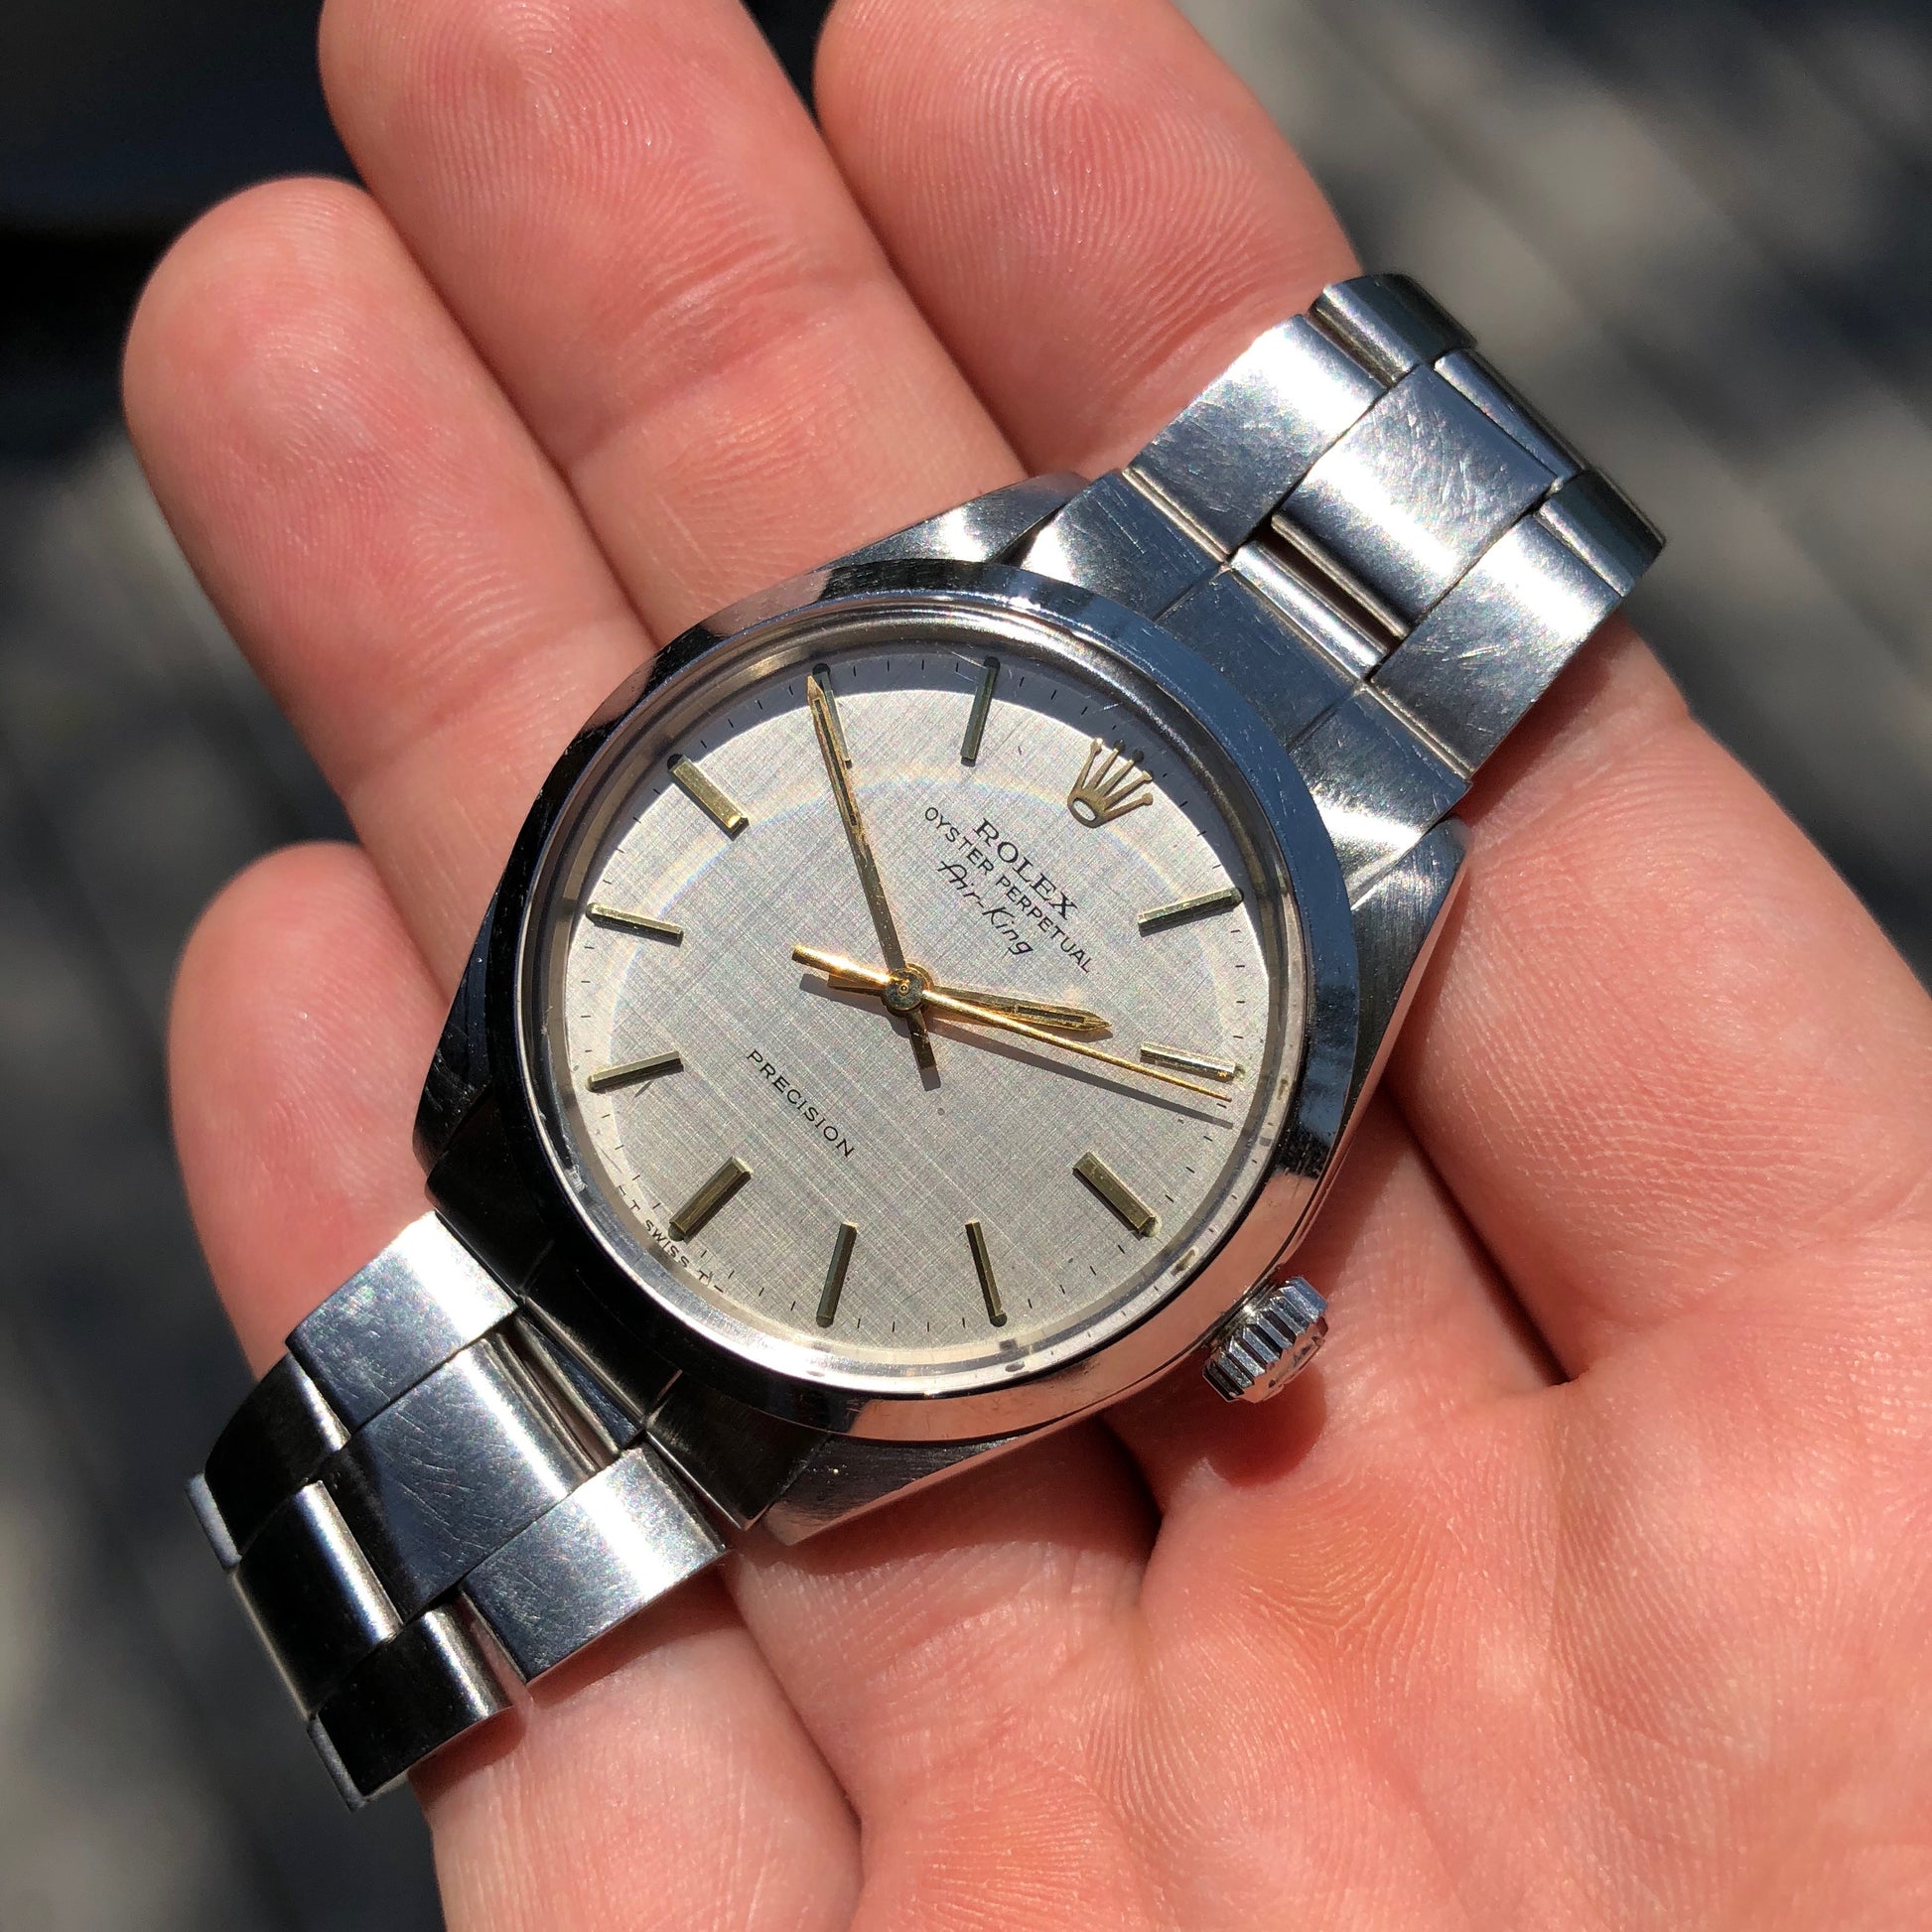 Vintage Rolex Air King 5500 Steel Linen Dial Caliber 1520 Automatic Wristwatch Circa 1973 - Hashtag Watch Company